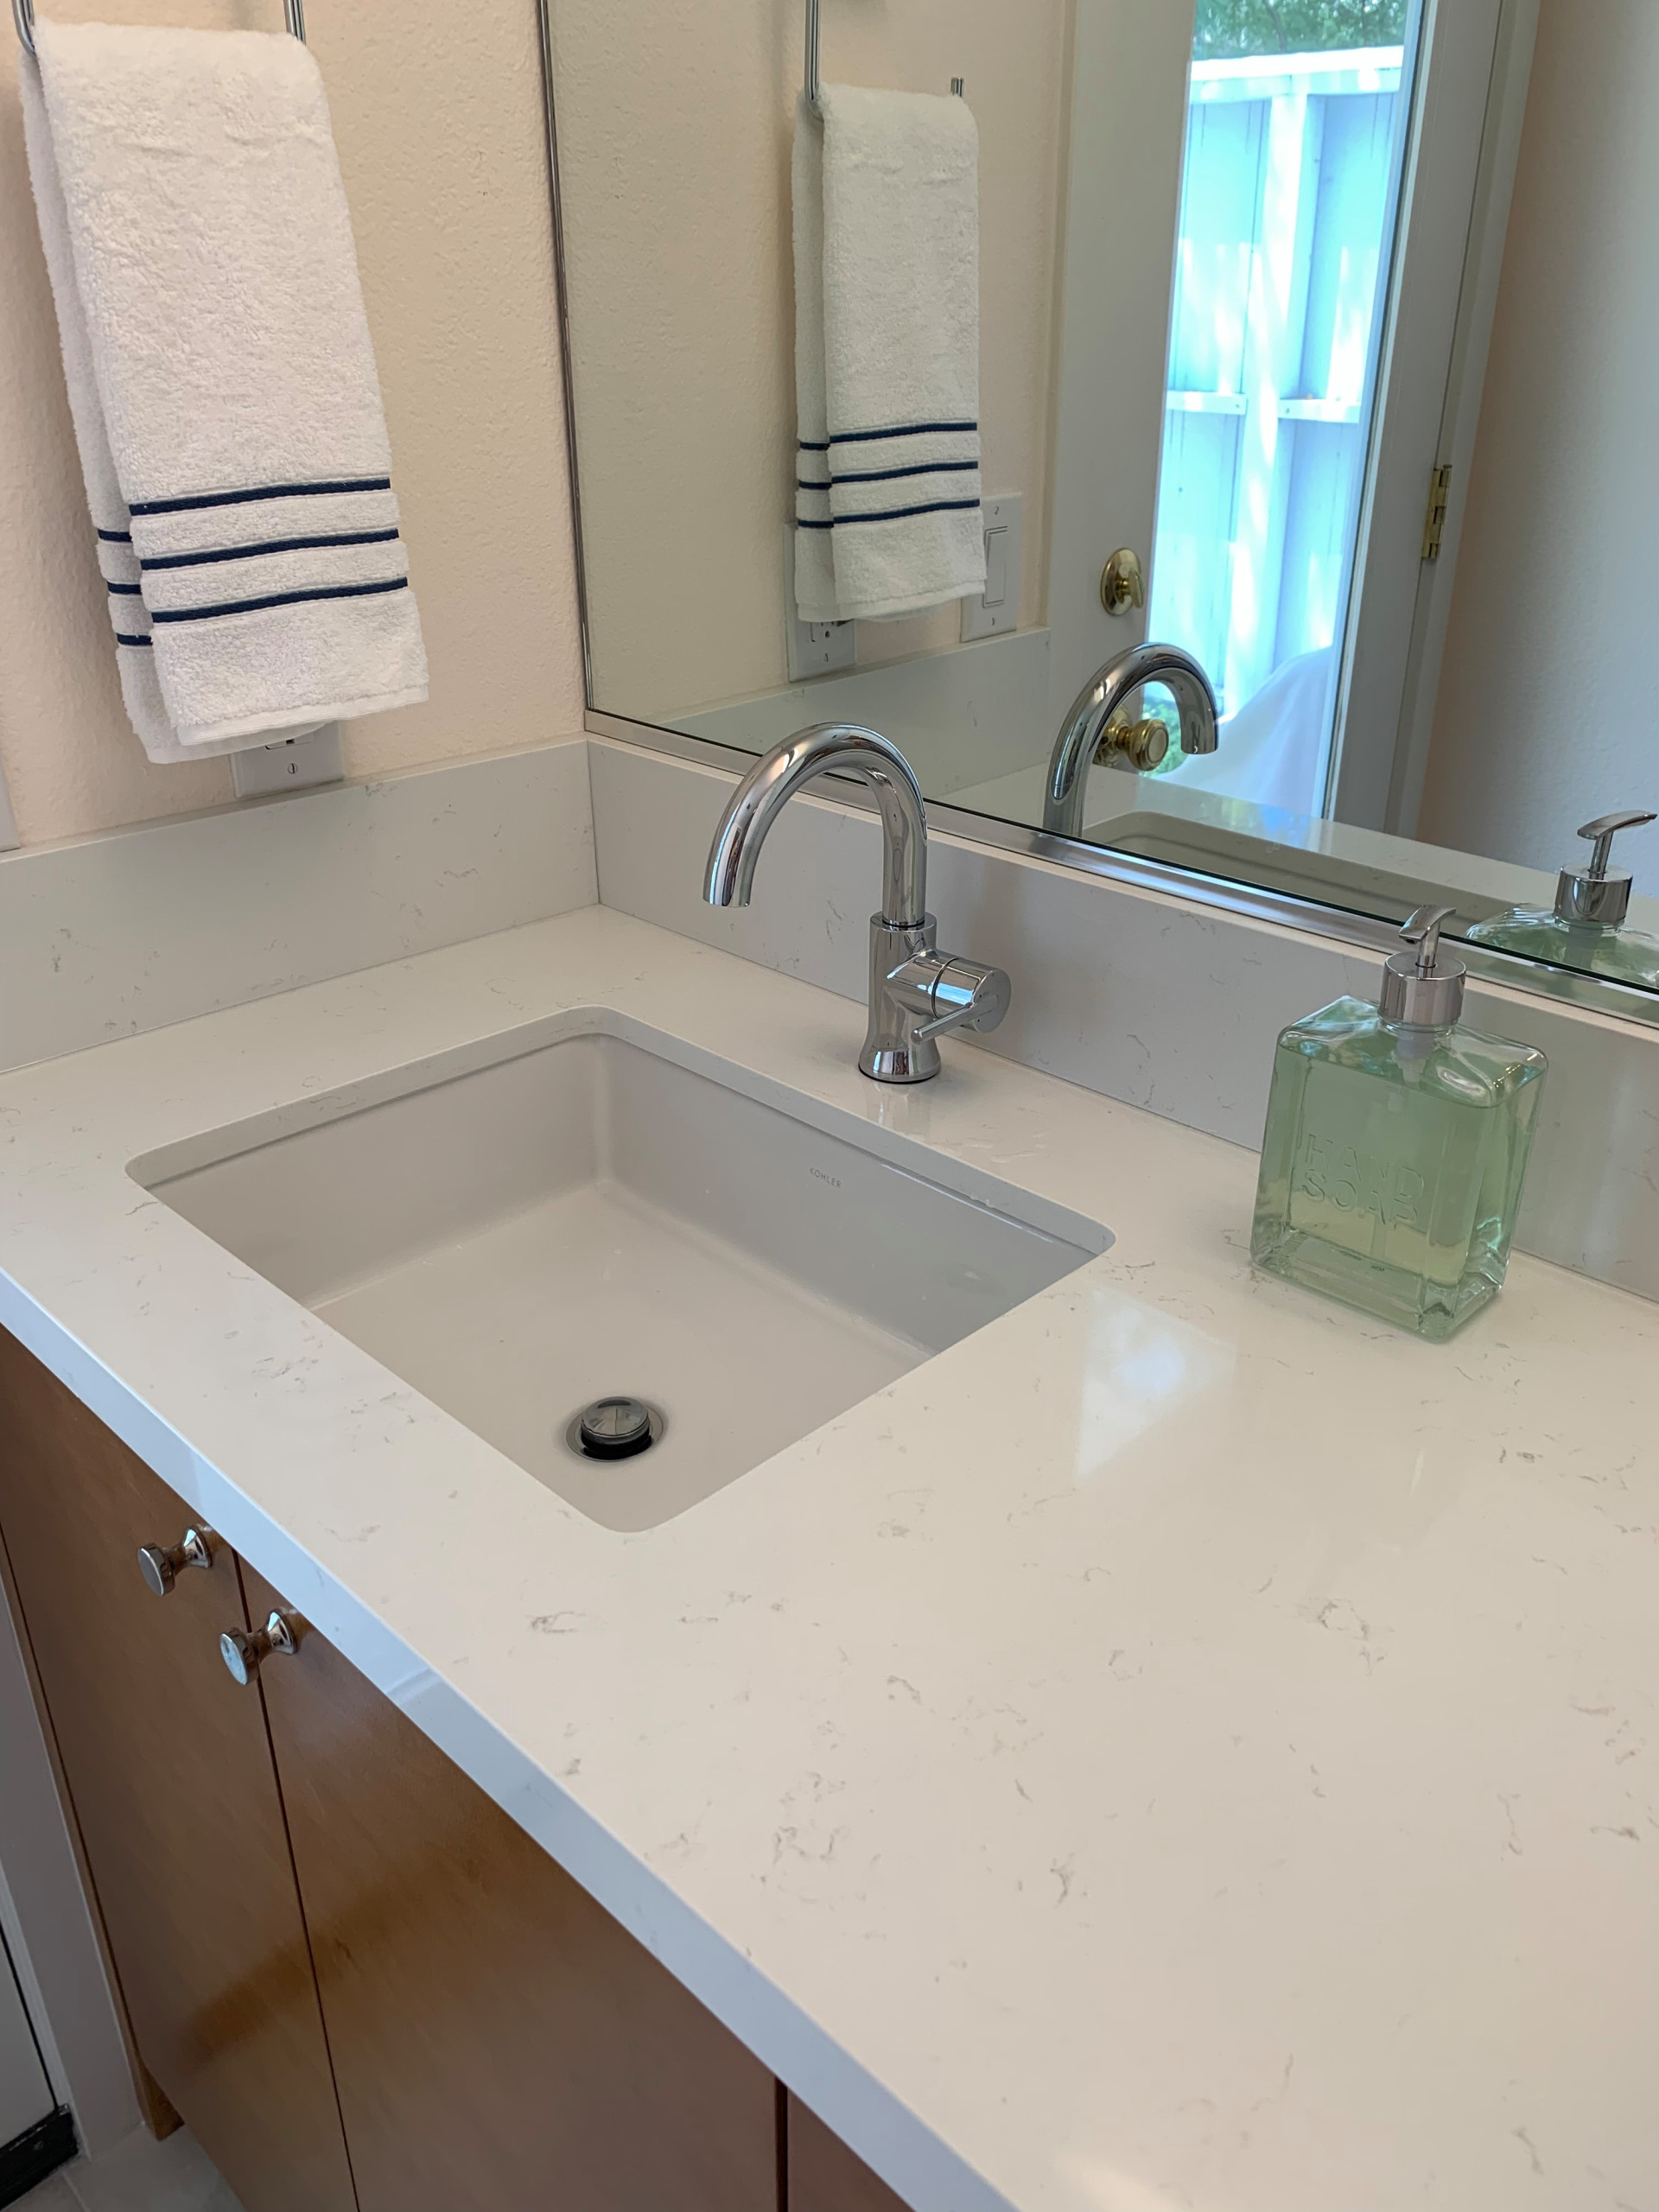 Flat Side & Bottom Sink Maximizes a Small Sink & Faucet